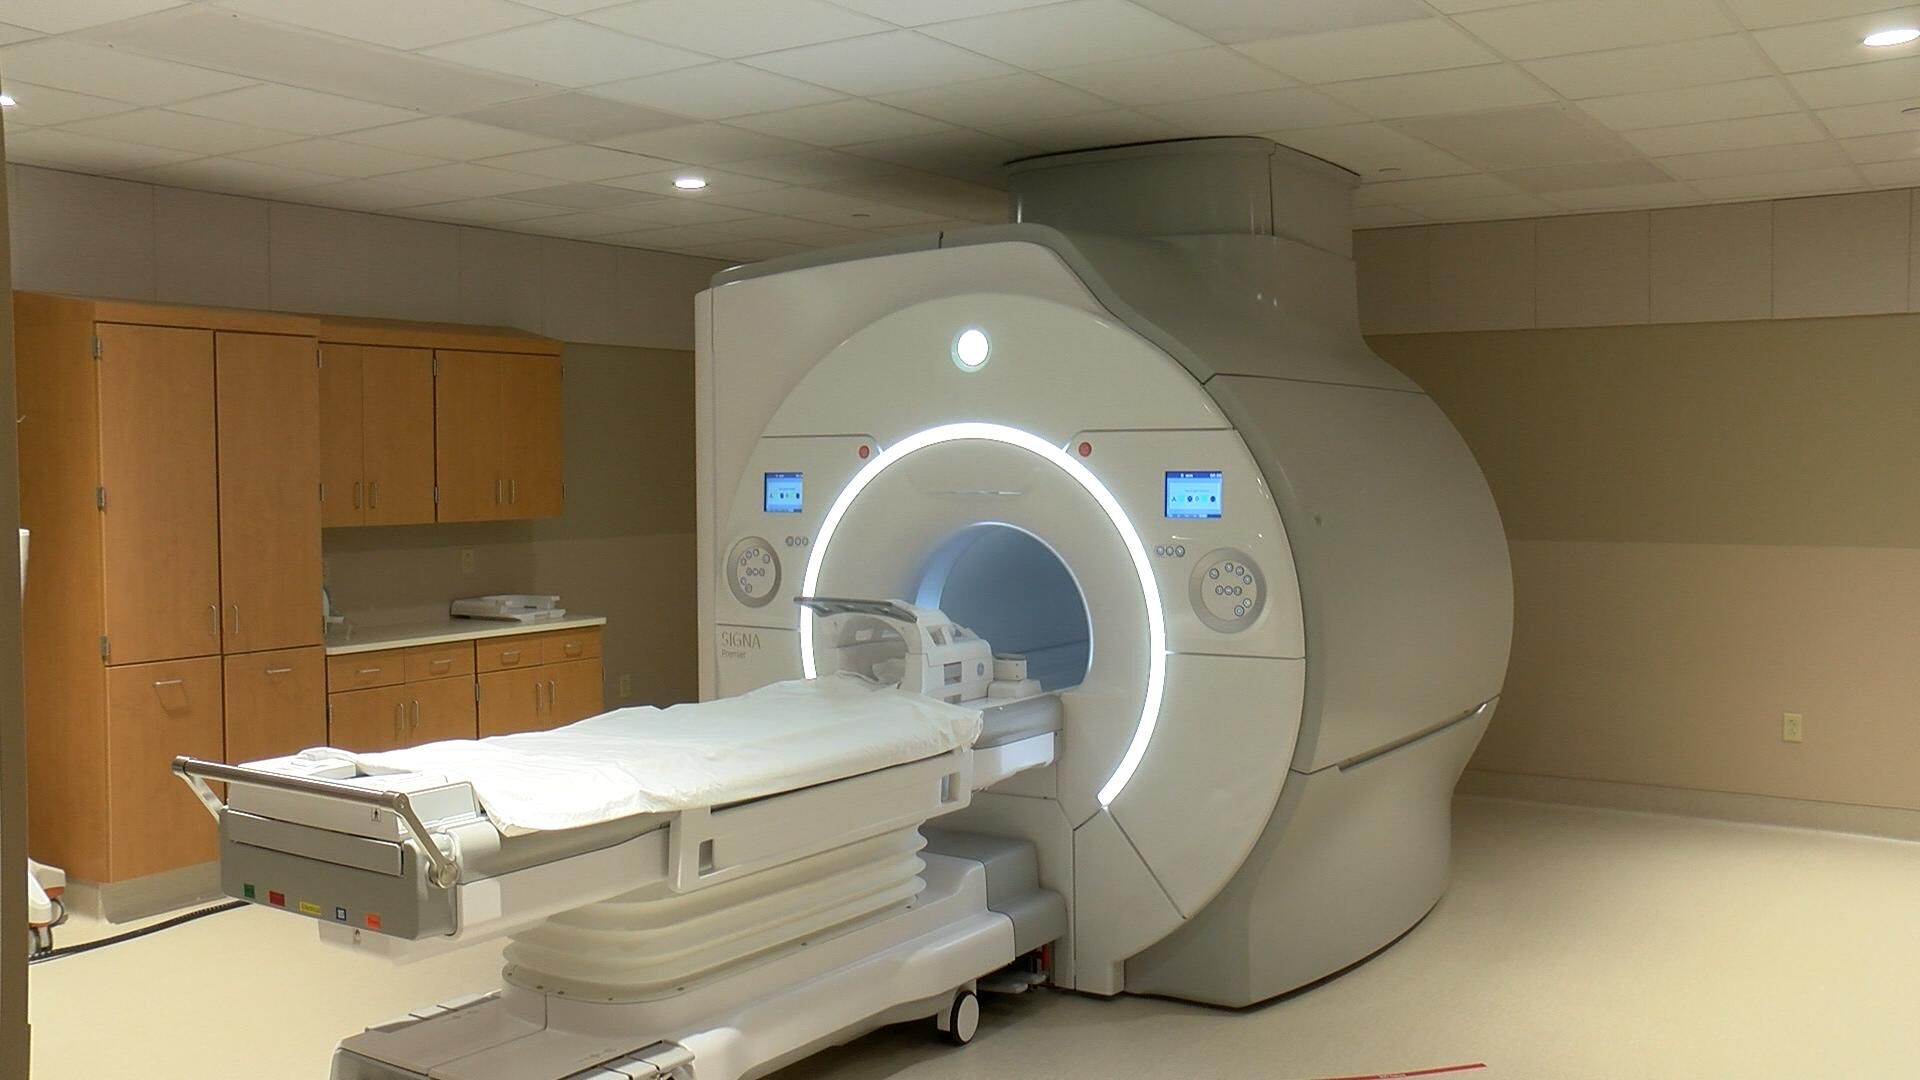 Mayo Clinic Health System unveils $8.1 million imaging suite in 